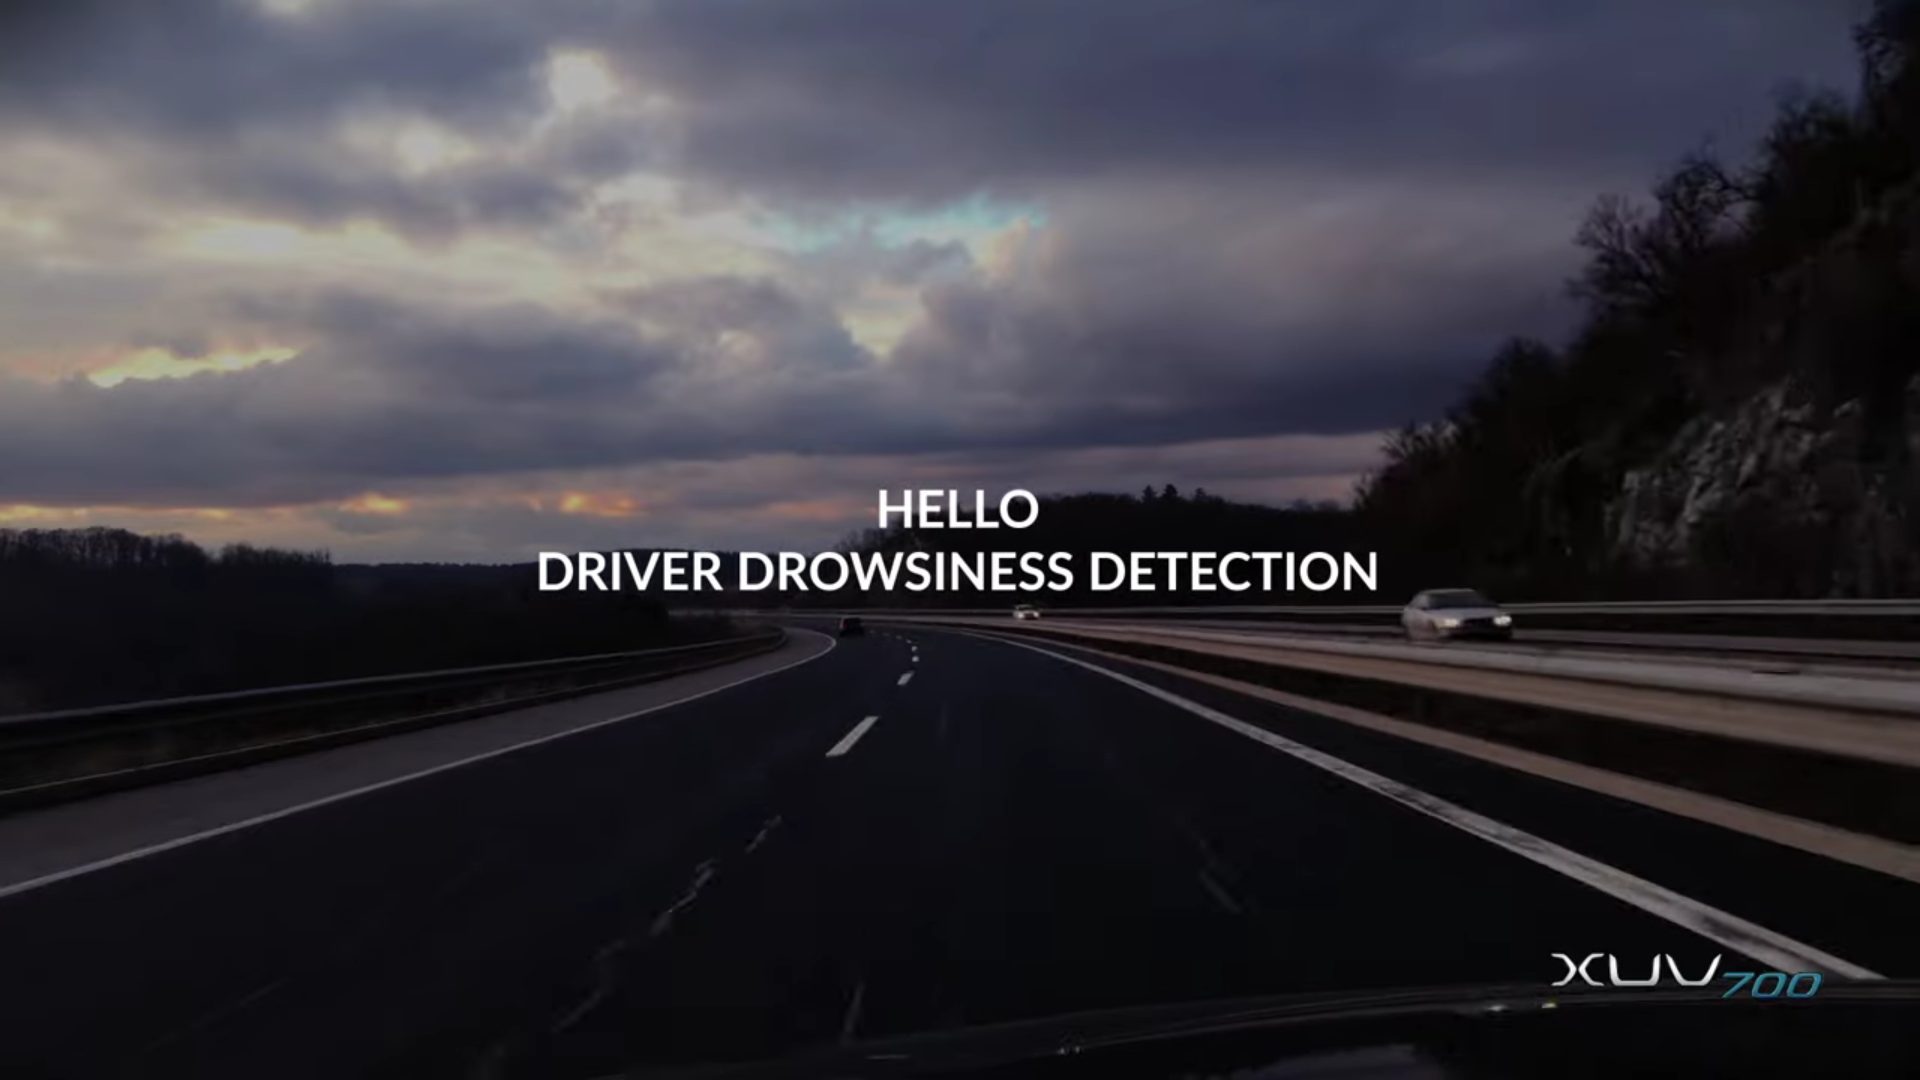 New Mahindra XUV700 Driver Drowsiness Detection System